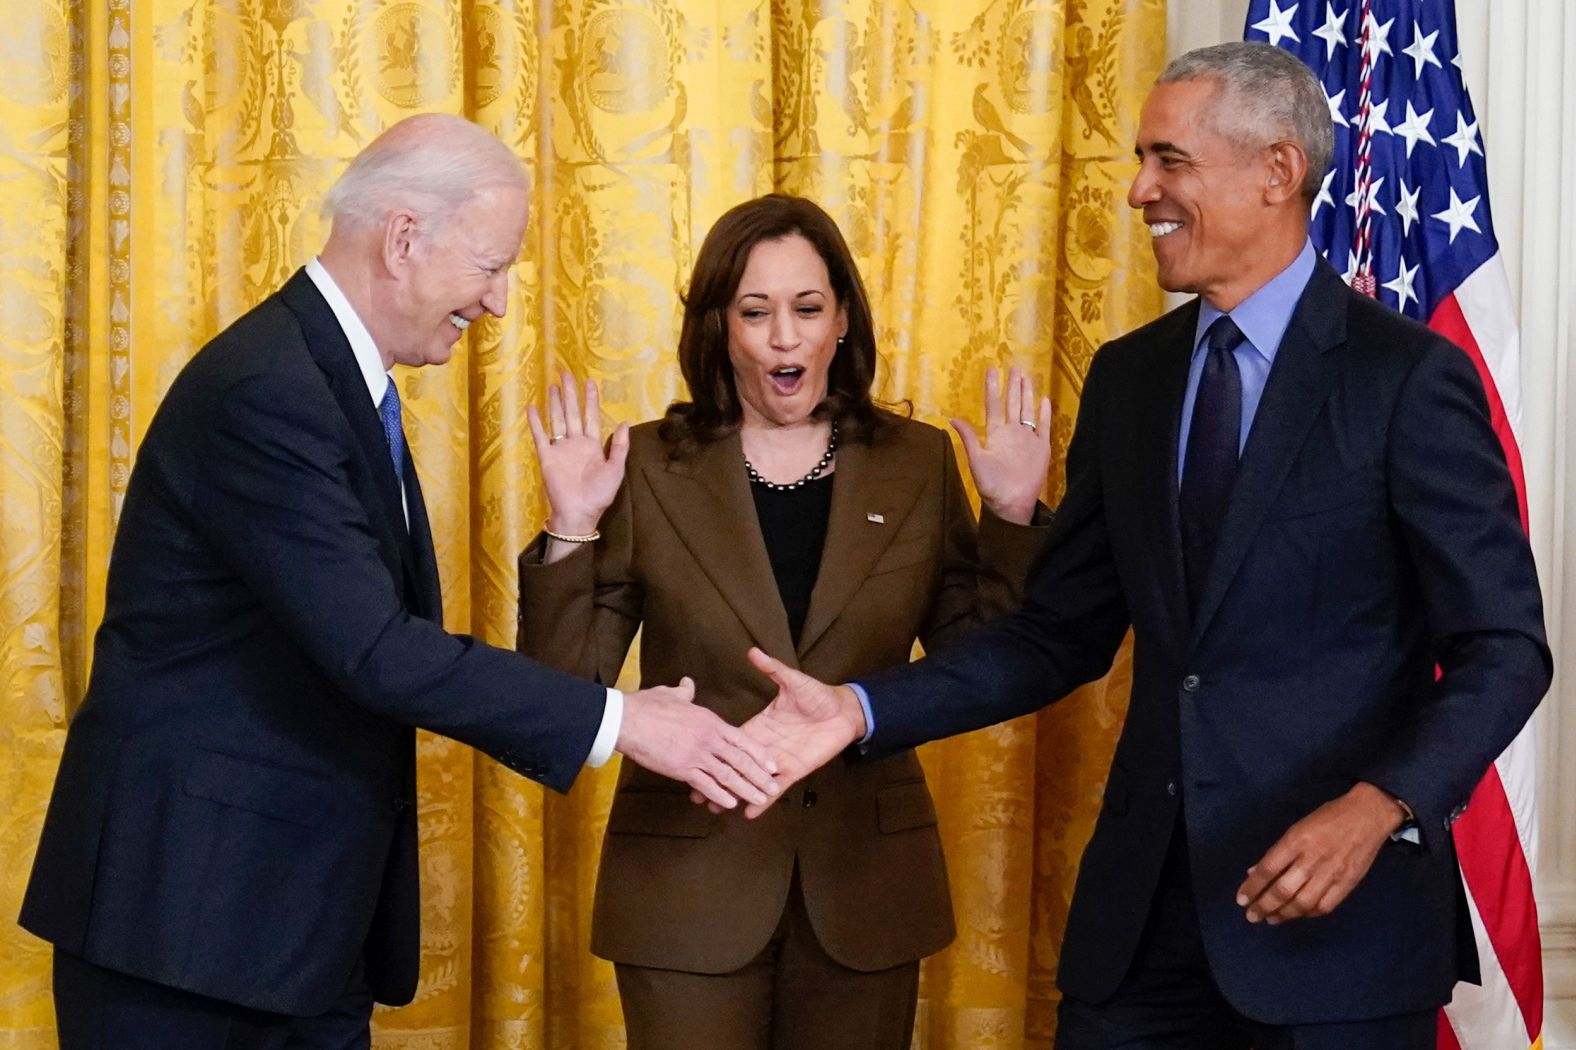 Harris reacts as Biden and Obama shake hands in the East Room.